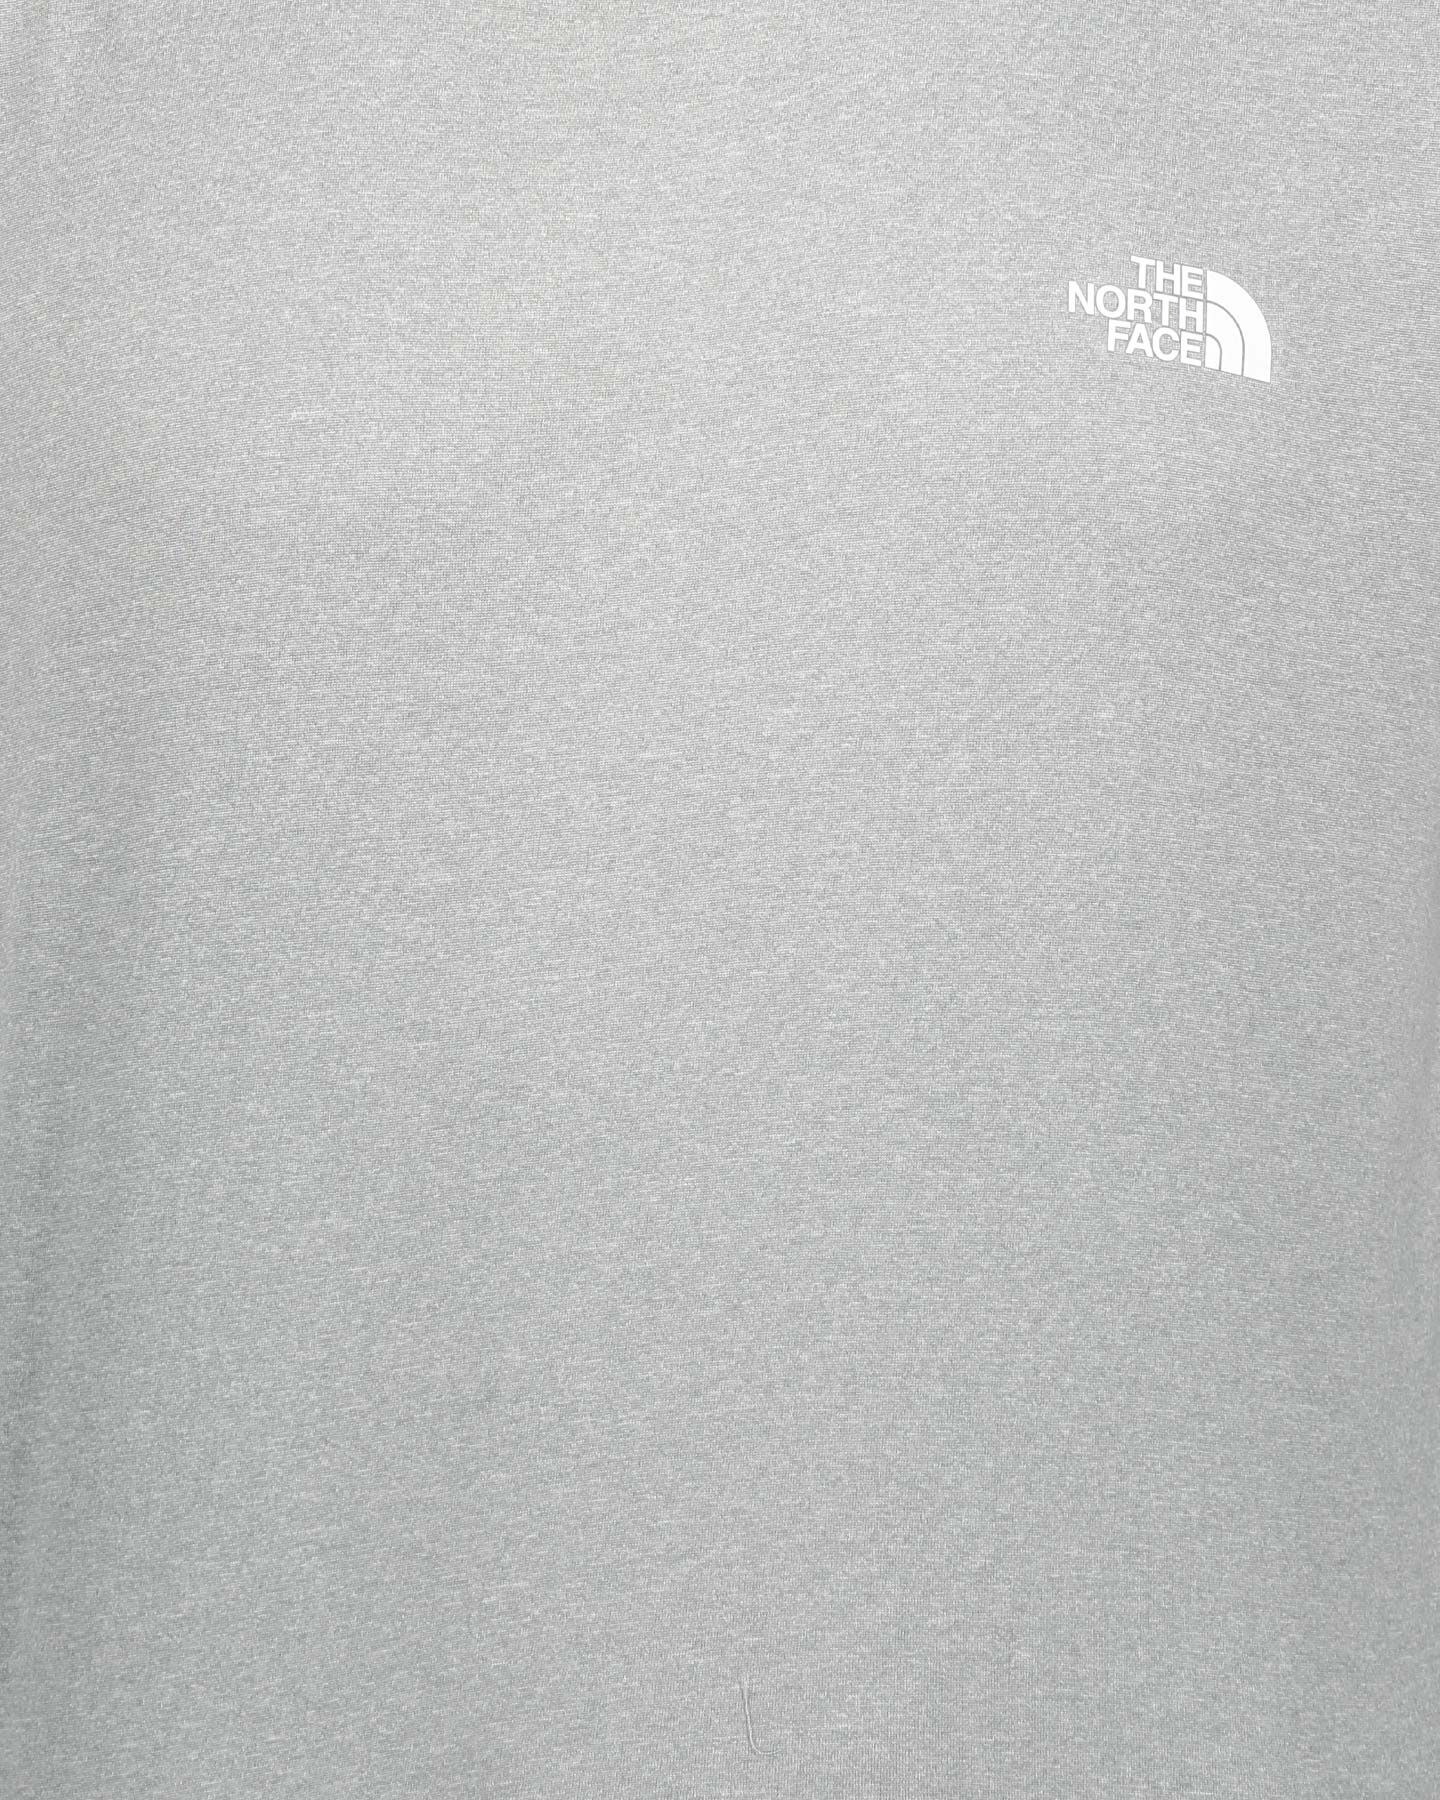  T-Shirt THE NORTH FACE REAXION AMP M S5292480|X8A|S scatto 2